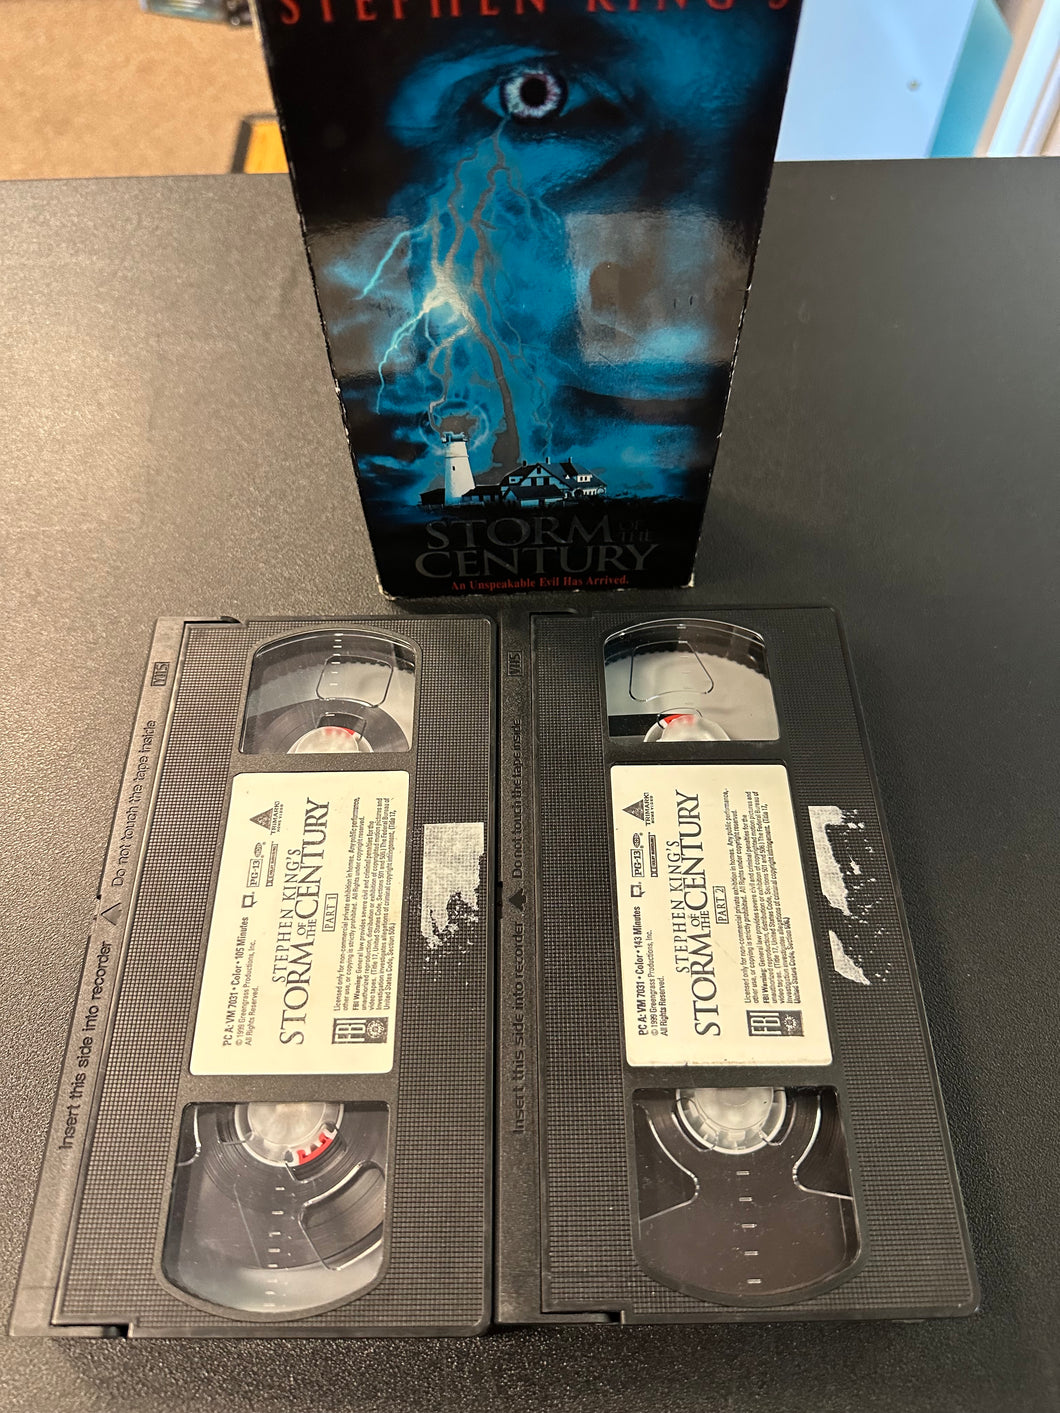 Stephen King’s Storm of the Century 2 Parts [VHS] PREOWNED Rental